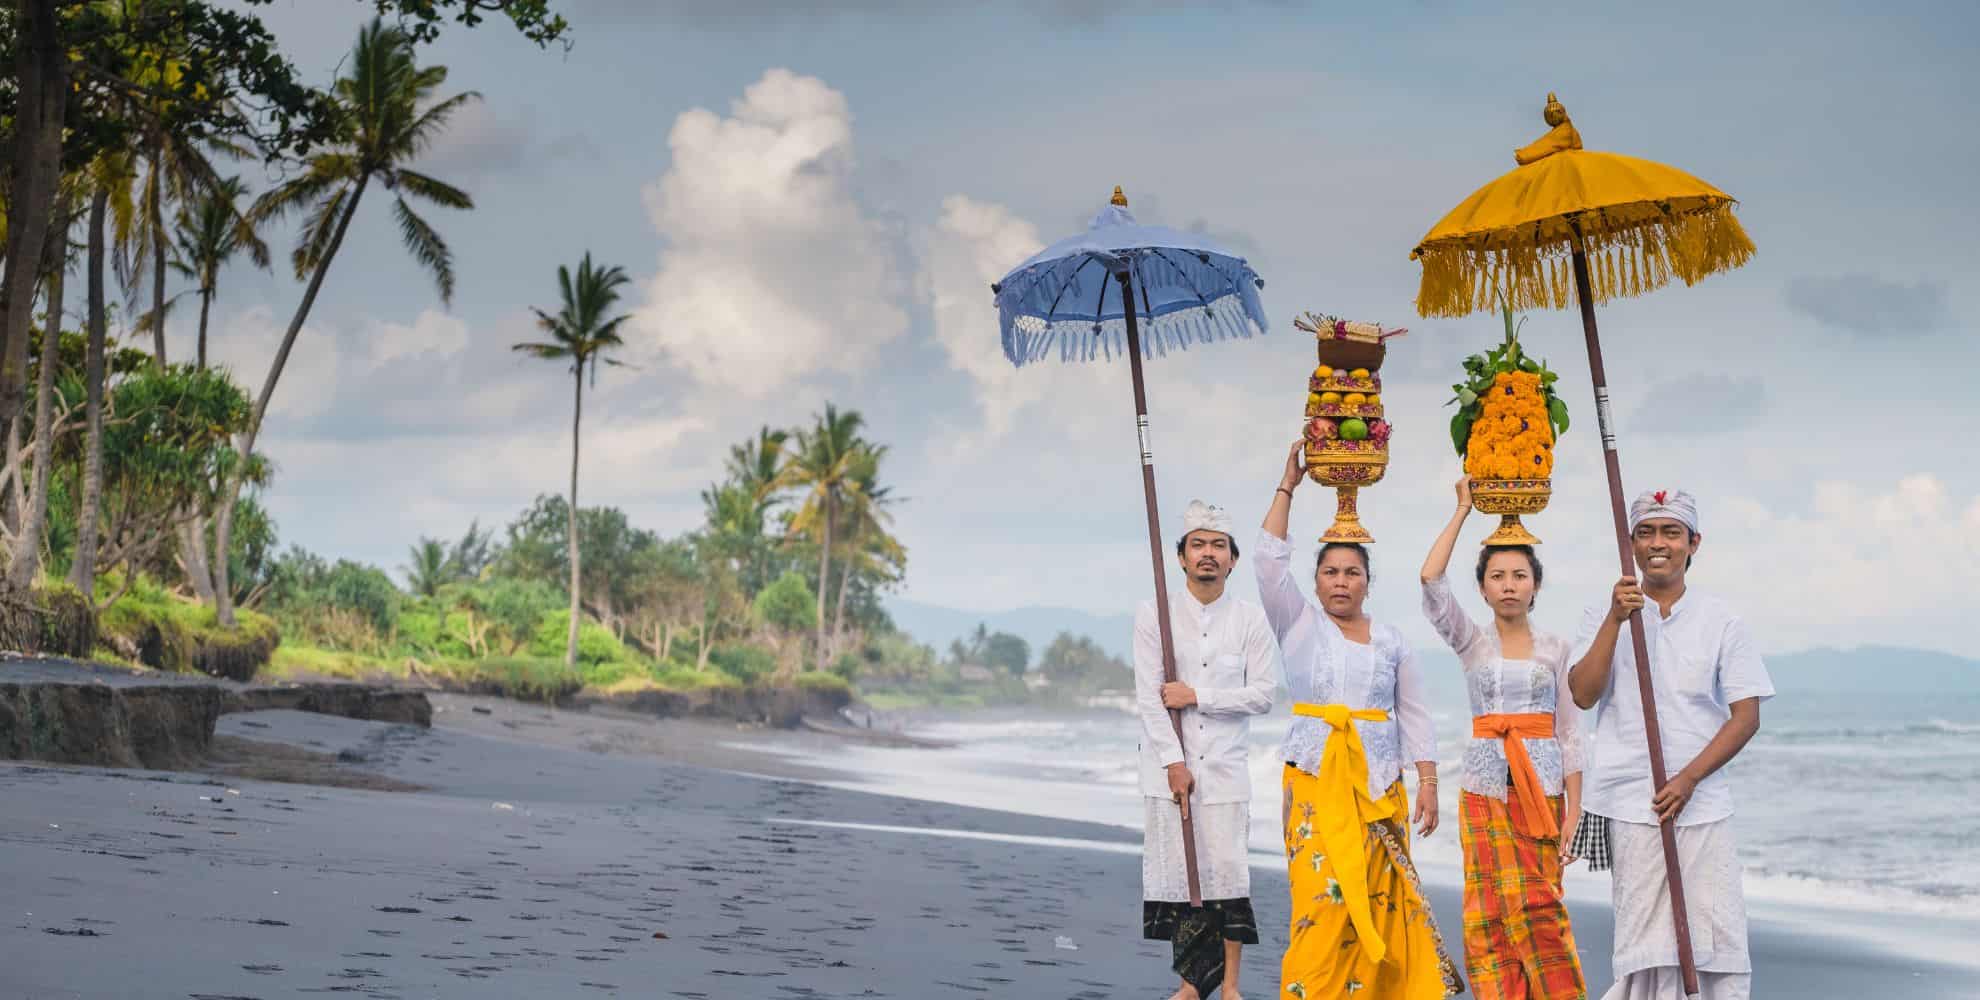 Balinese people in traditional dress